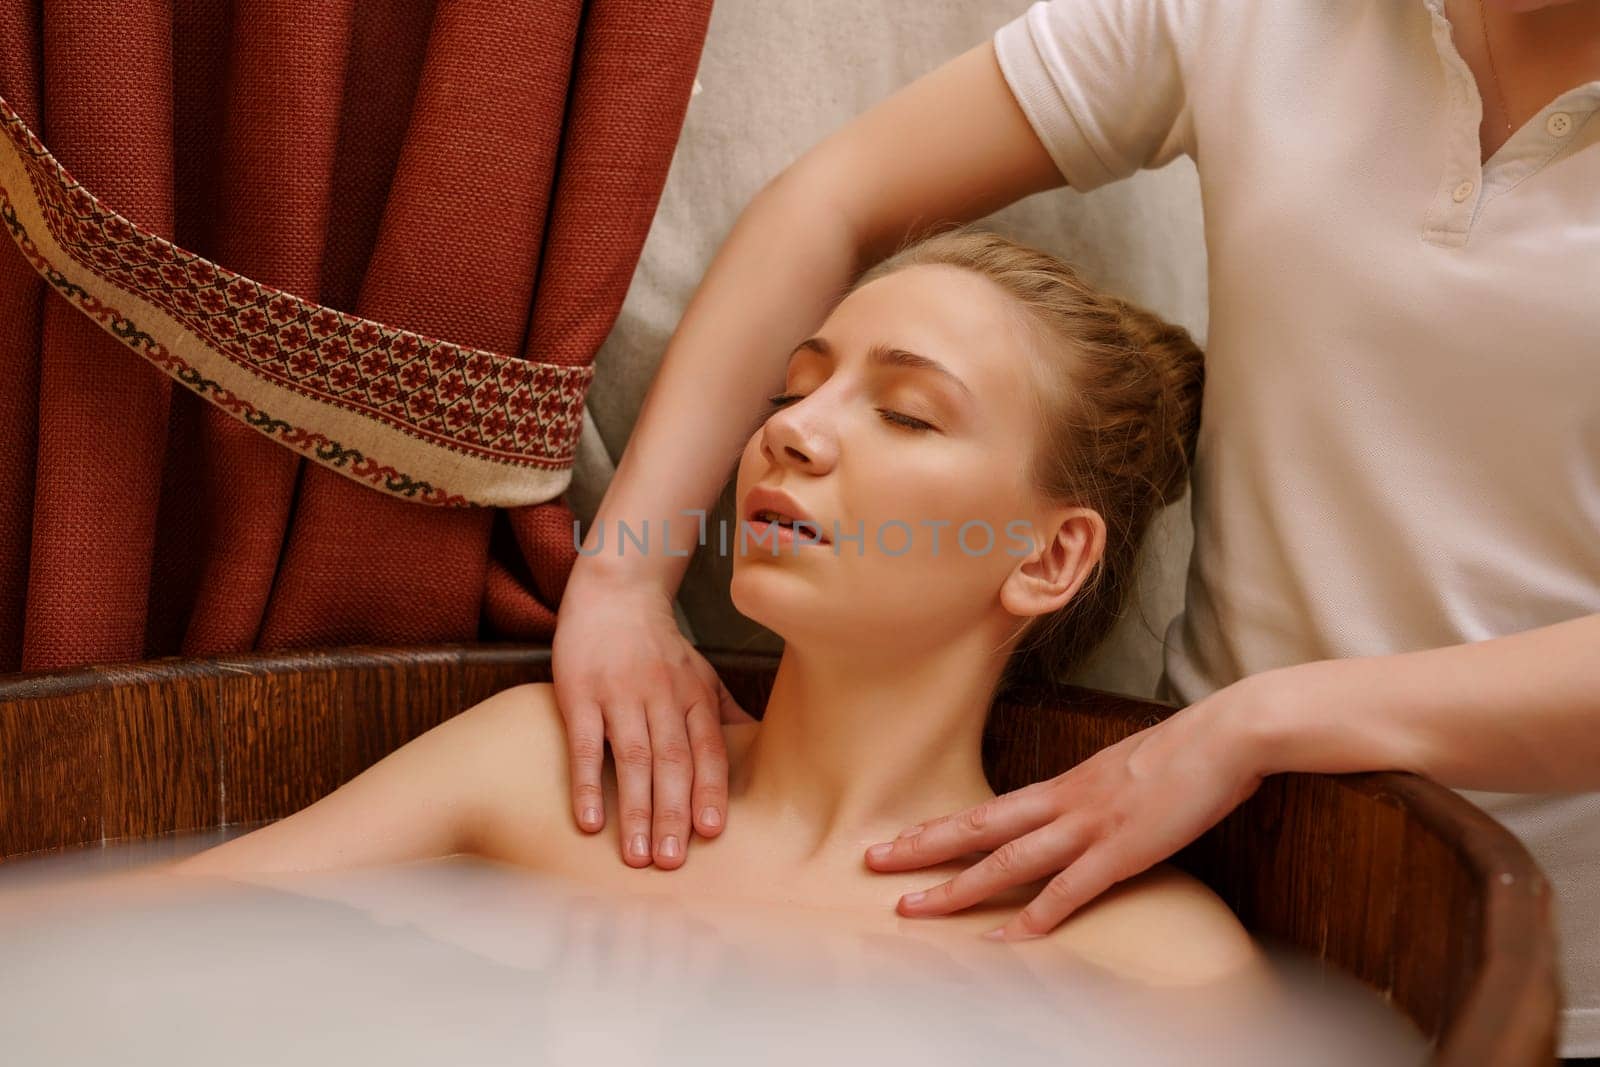 In spa. Girl's shoulders massaged during she taking bath